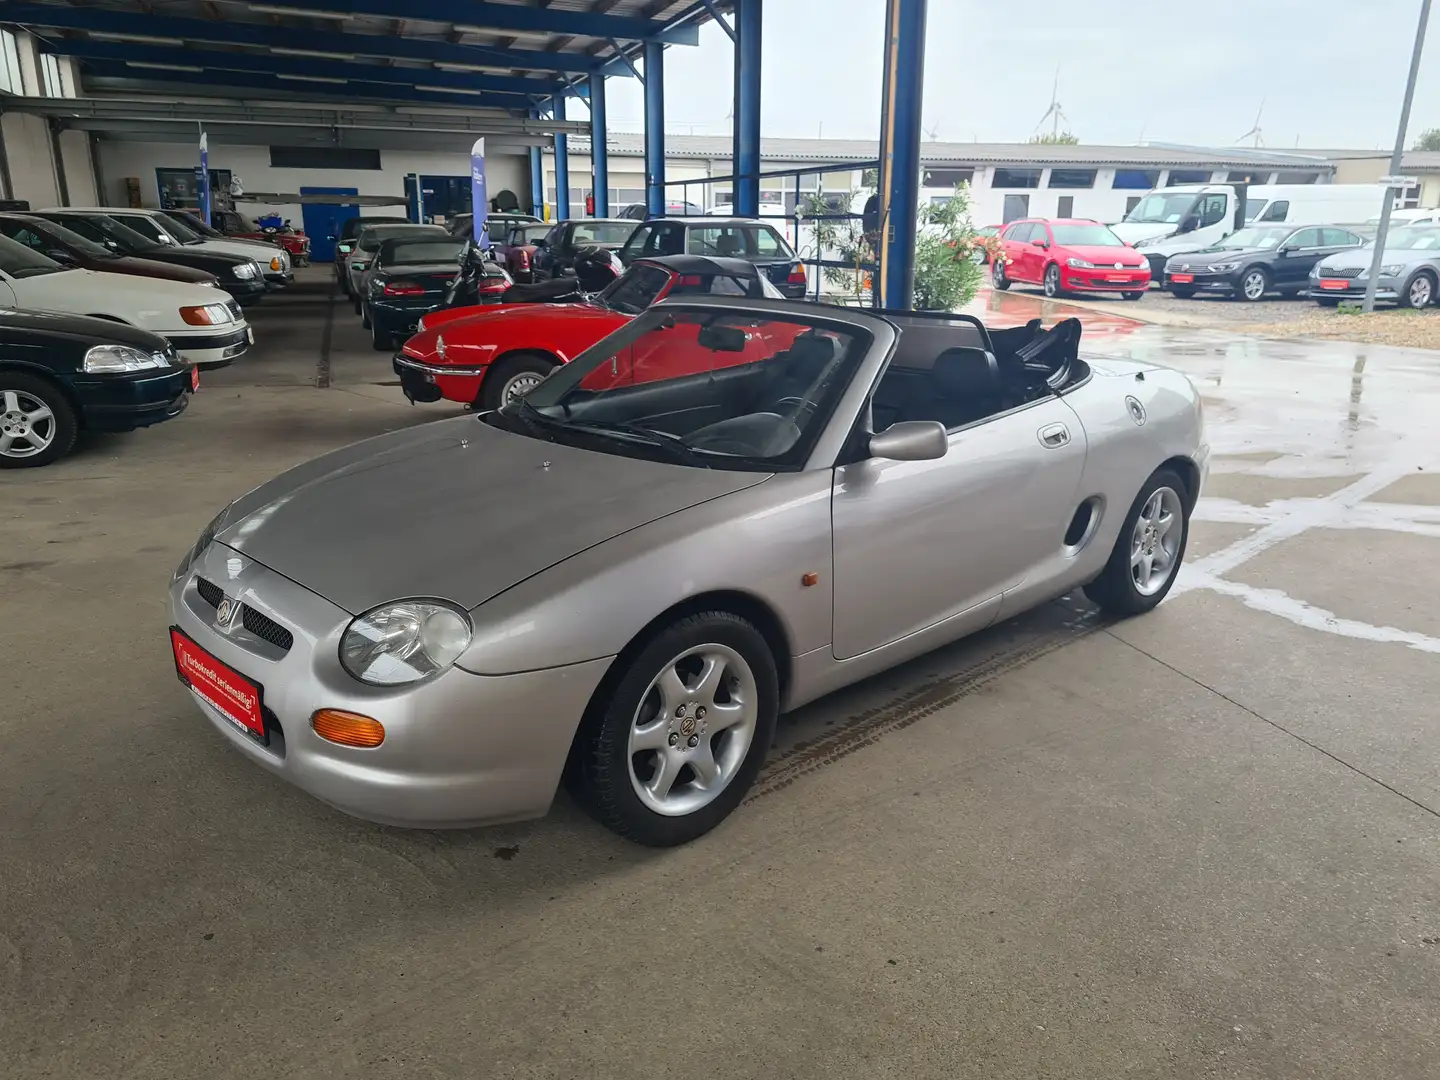 MG MGF F 1,8i Cabrio - neues Pickerl! Zilver - 1